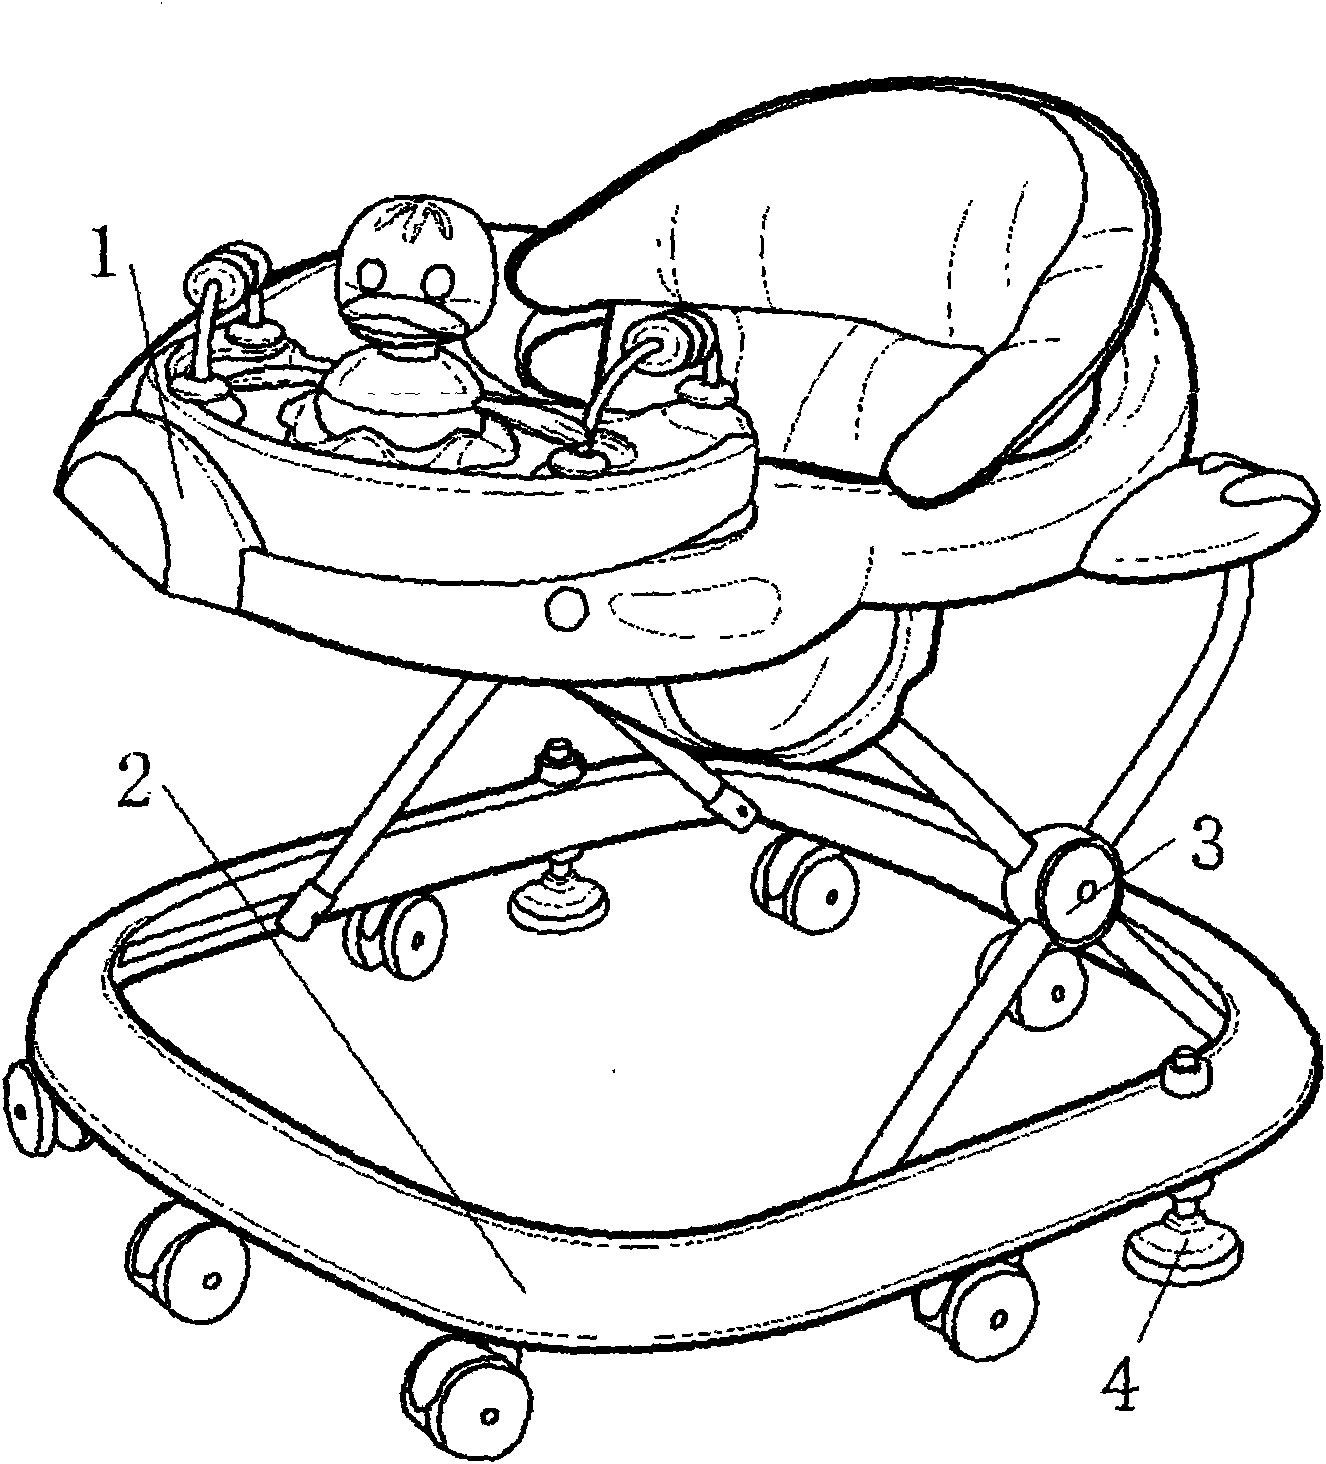 Baby walker with braking structure